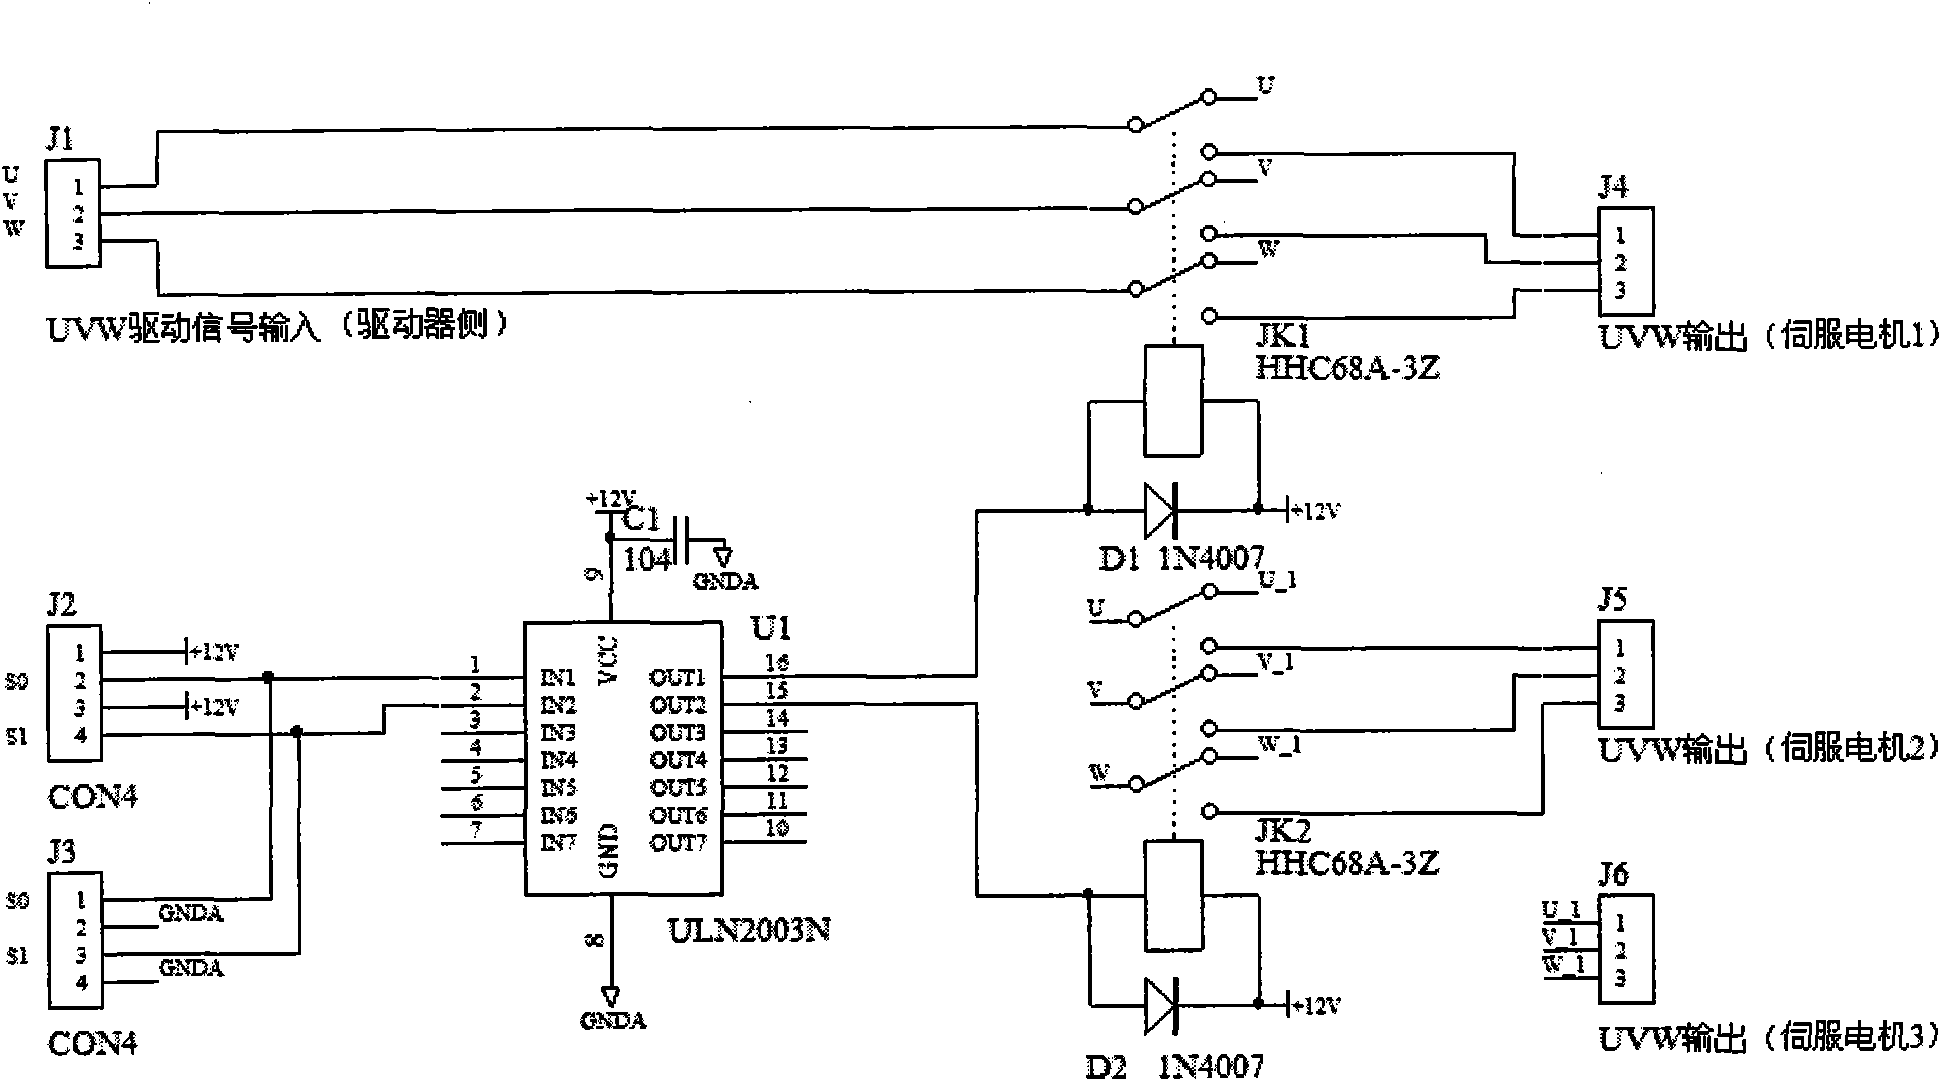 Alternating-current servo control system with single driver and multiple motors